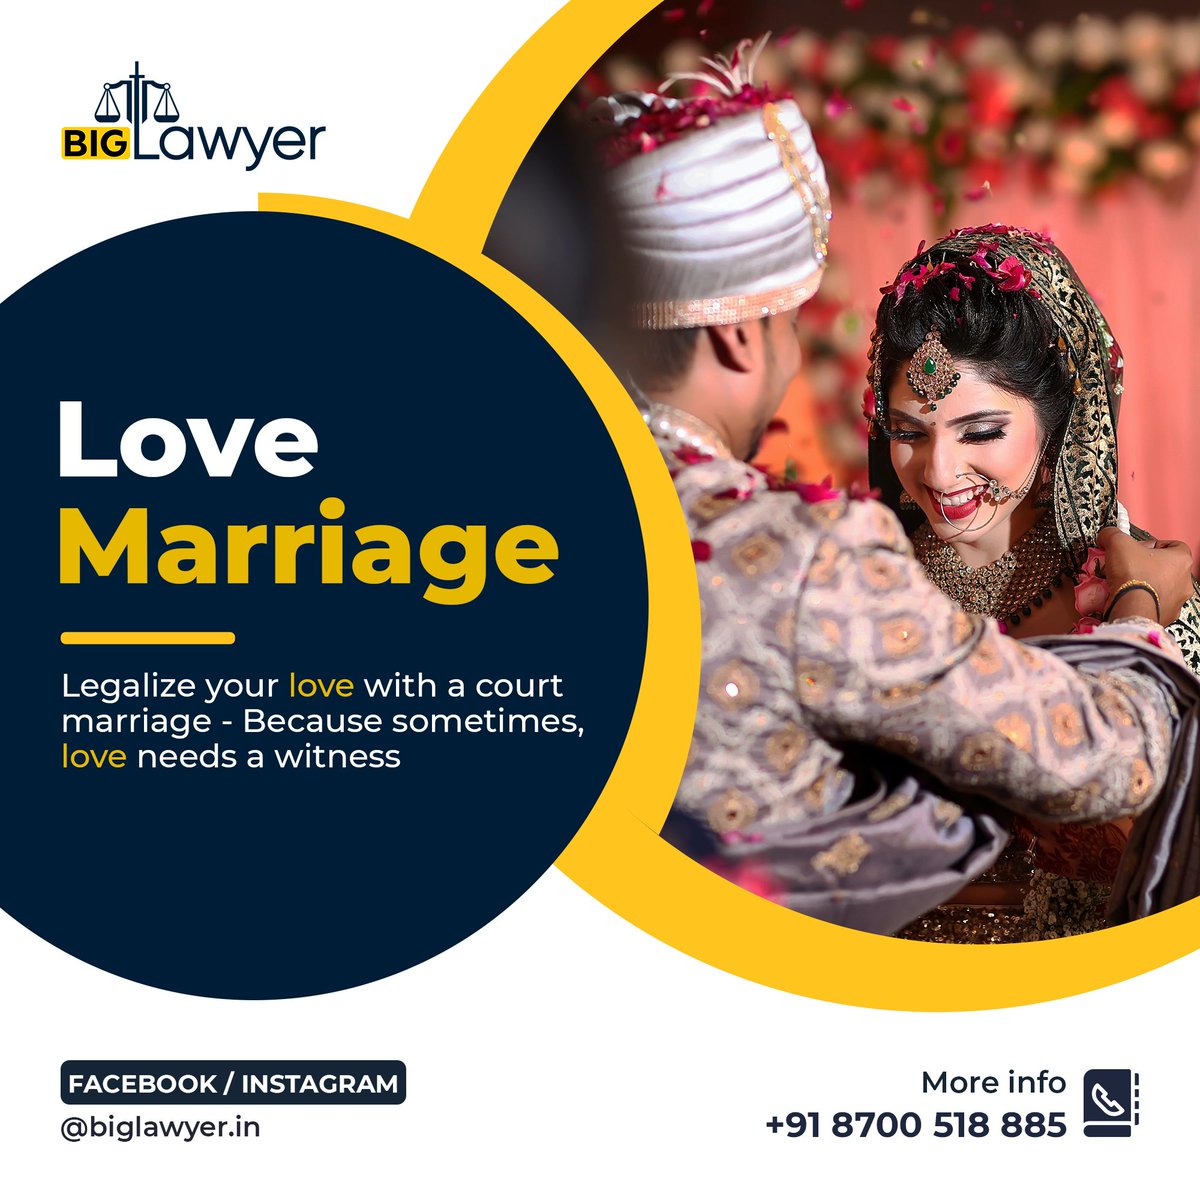 Let us handle the paperwork, while you enjoy your special day.
Making your court marriage hassle-free and memorable.
Your court marriage is in good hands with BigLawyer.

Give us a call or message on 8700518885.

Location:- Delhi

#courthousewedding
#civilceremony
#intimatewedd